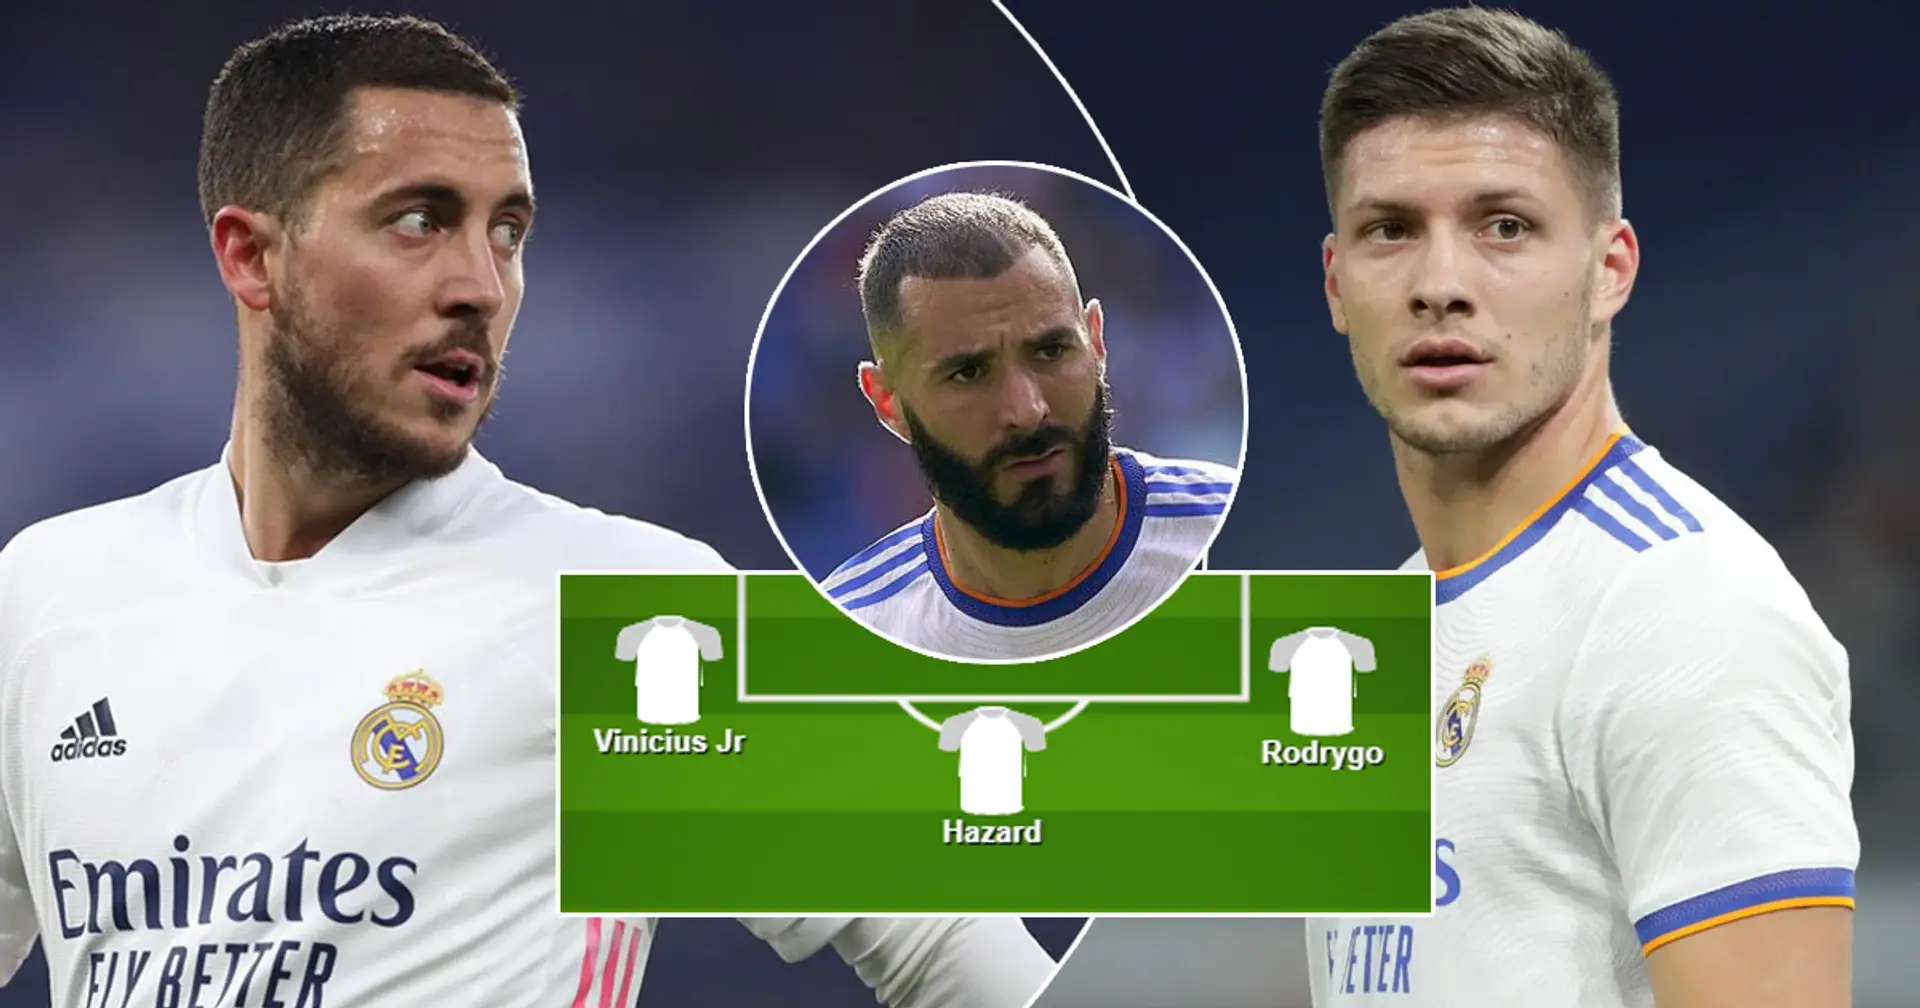 Jovic or Hazard as false 9? Select Real Madrid's ultimate XI for Elche clash from 3 options